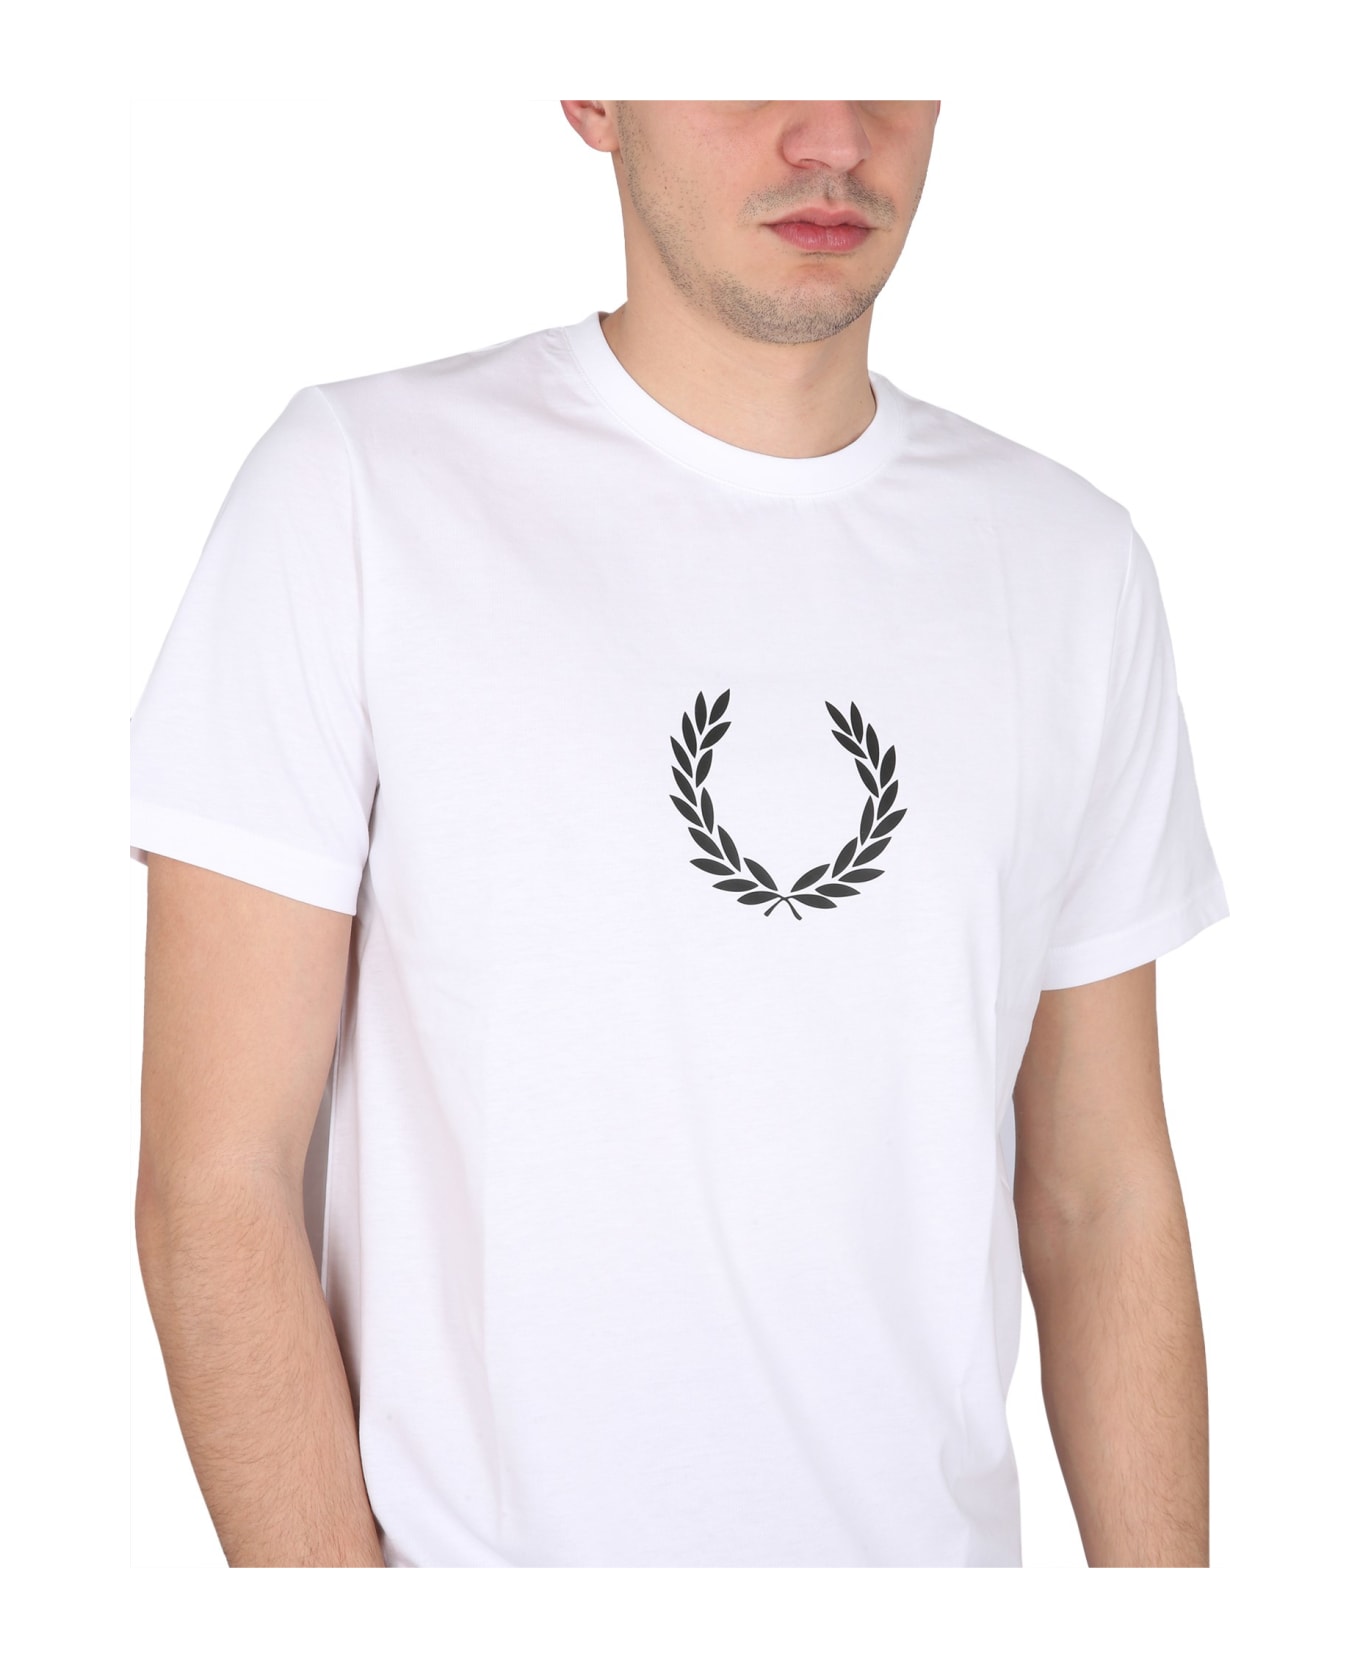 Fred Perry Crewneck T-shirt - White シャツ